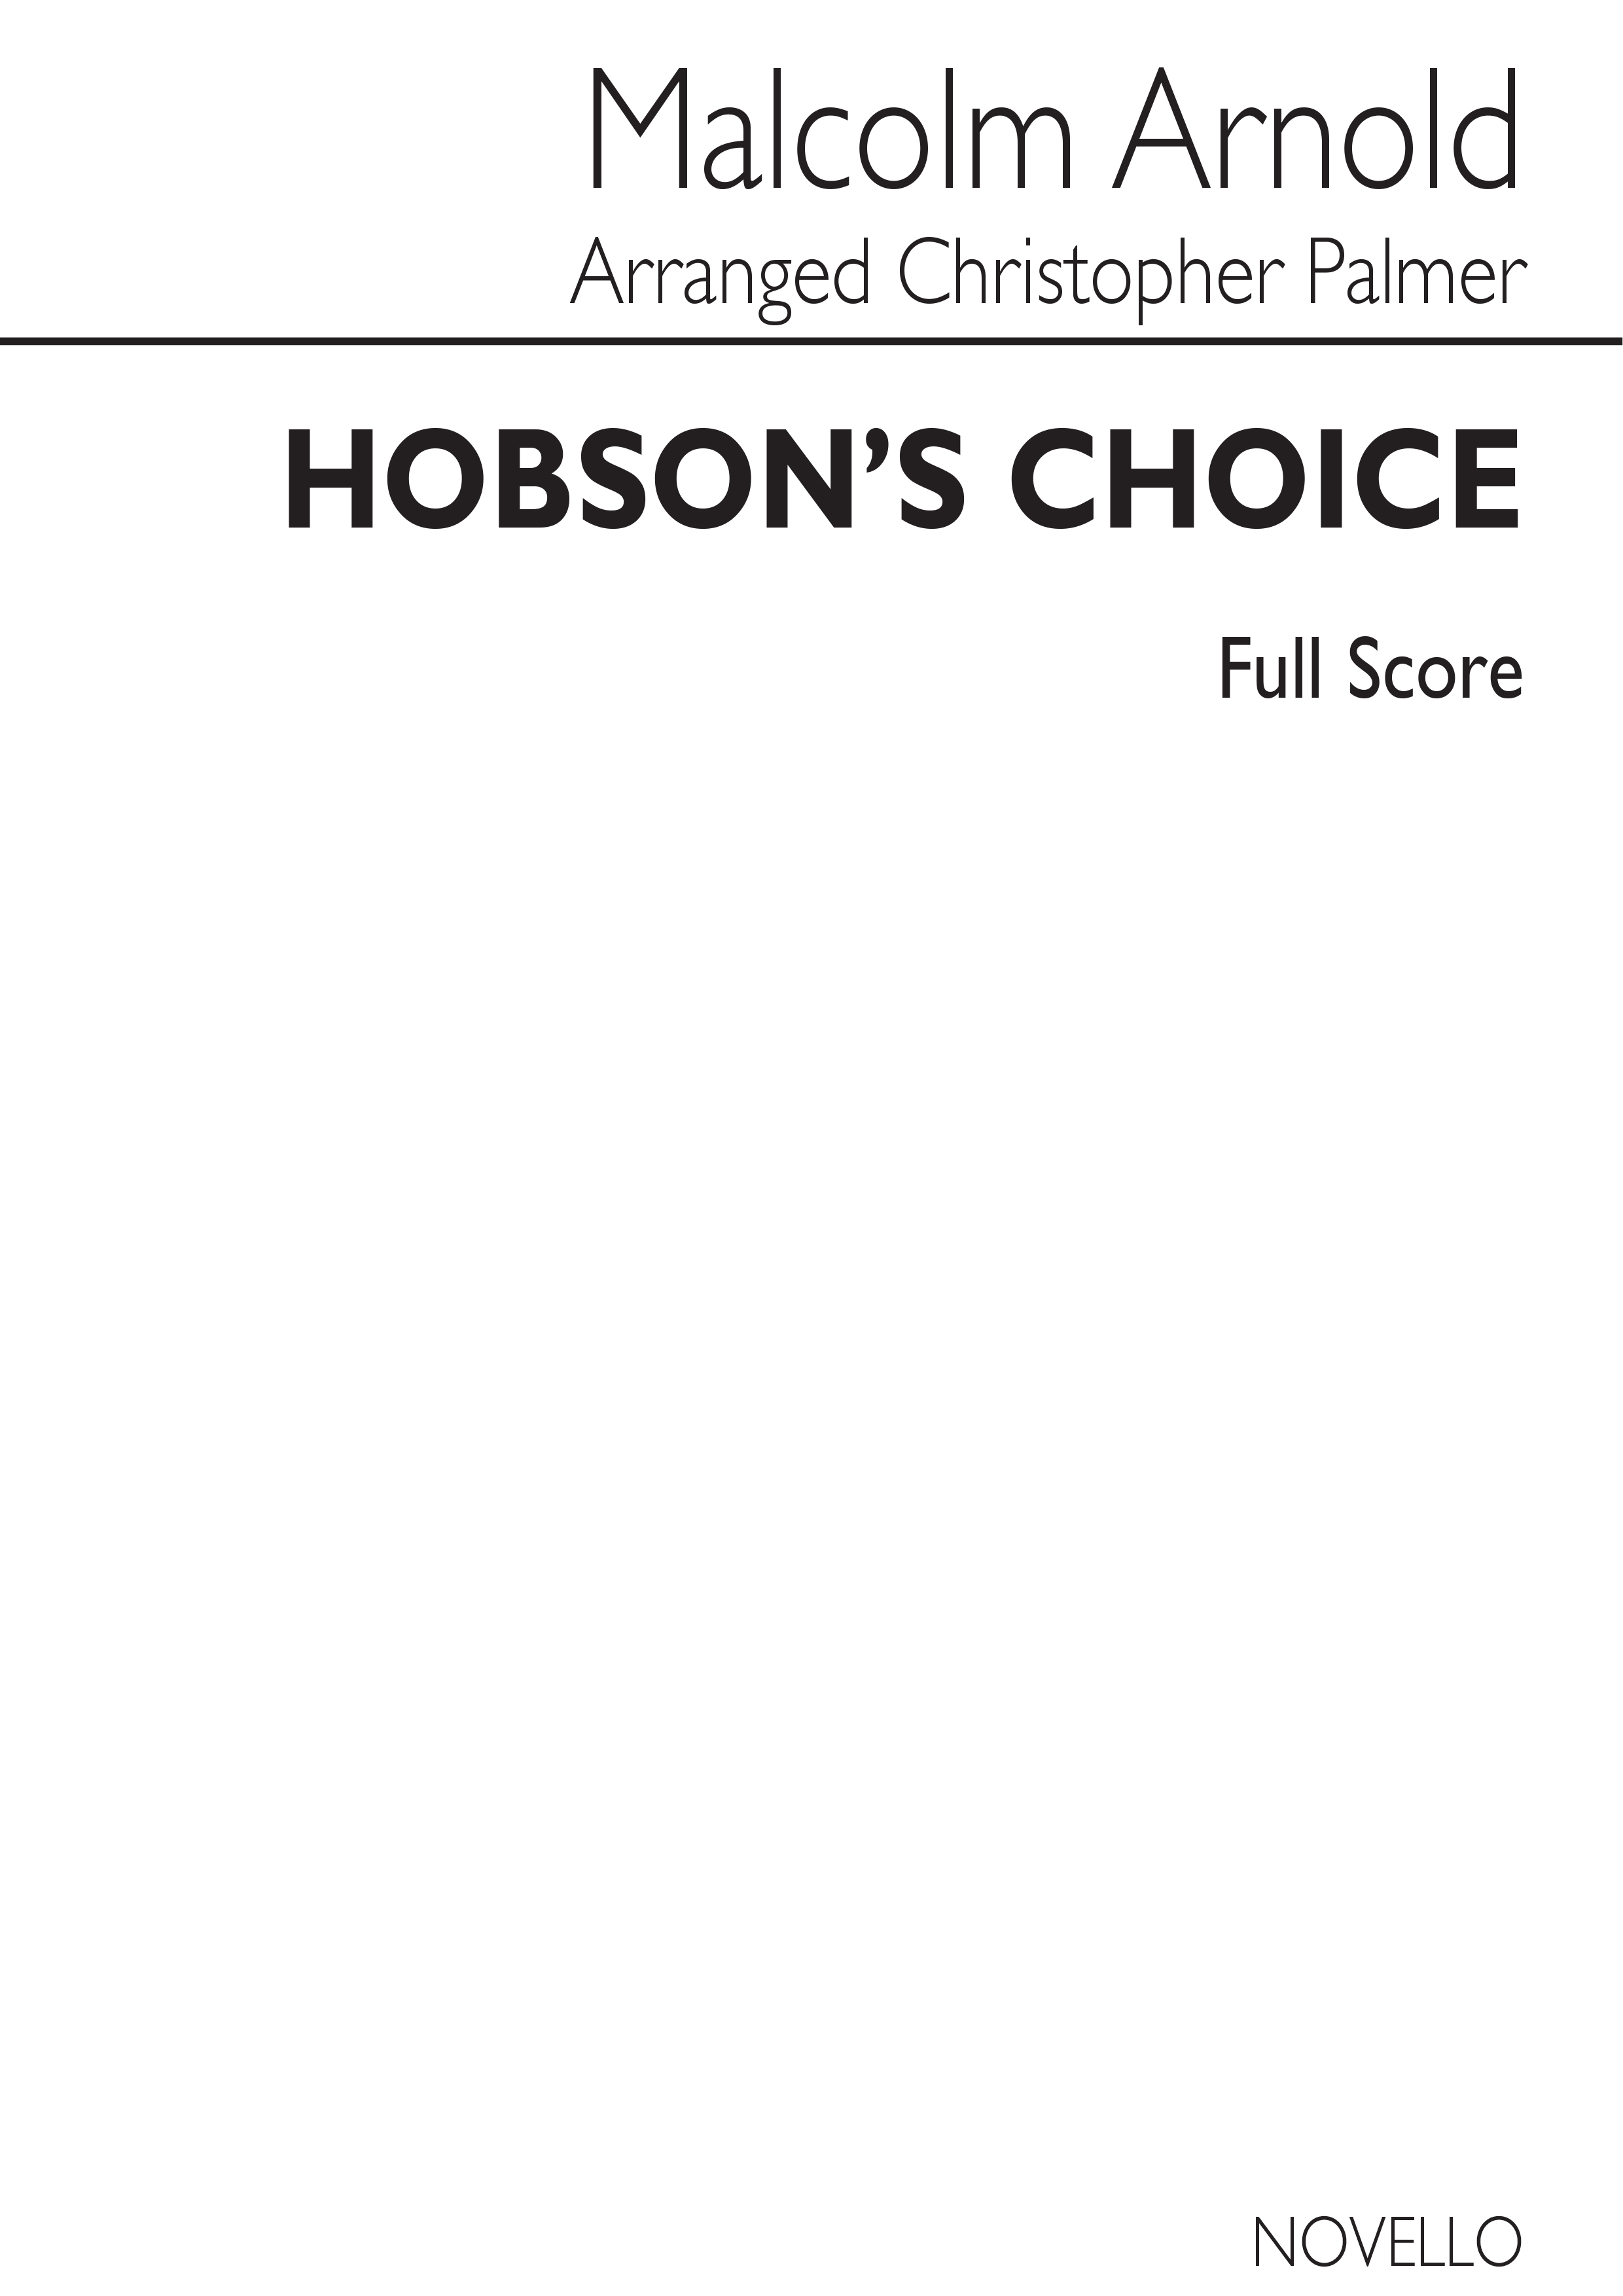 Malcolm Arnold: Hobson's Choice (Full Score)